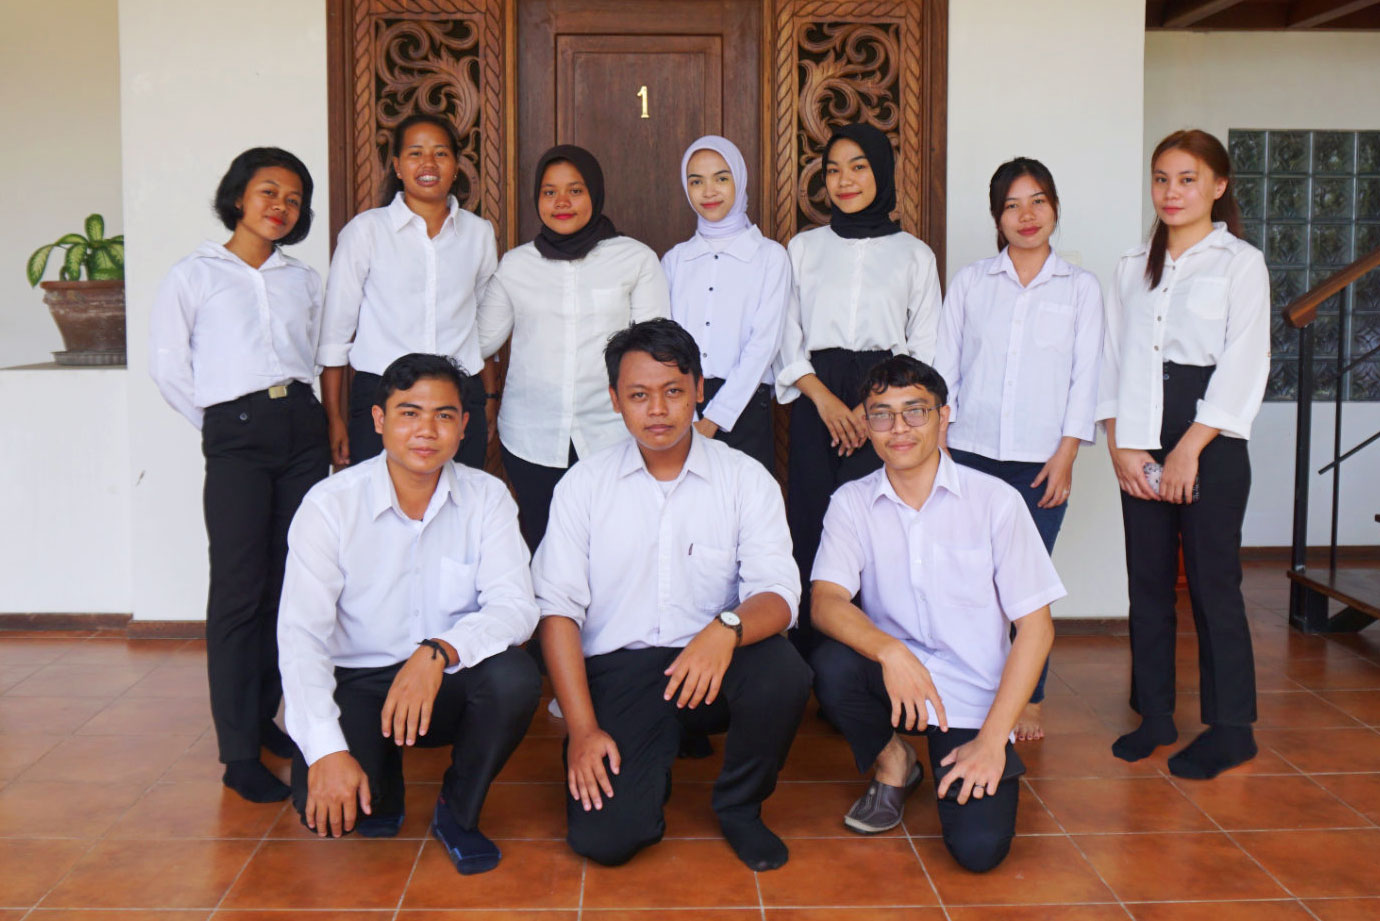 Our first batch of students have finished their 3-months internship, graduated from the program and have found jobs in the hospitality and tourism industry.